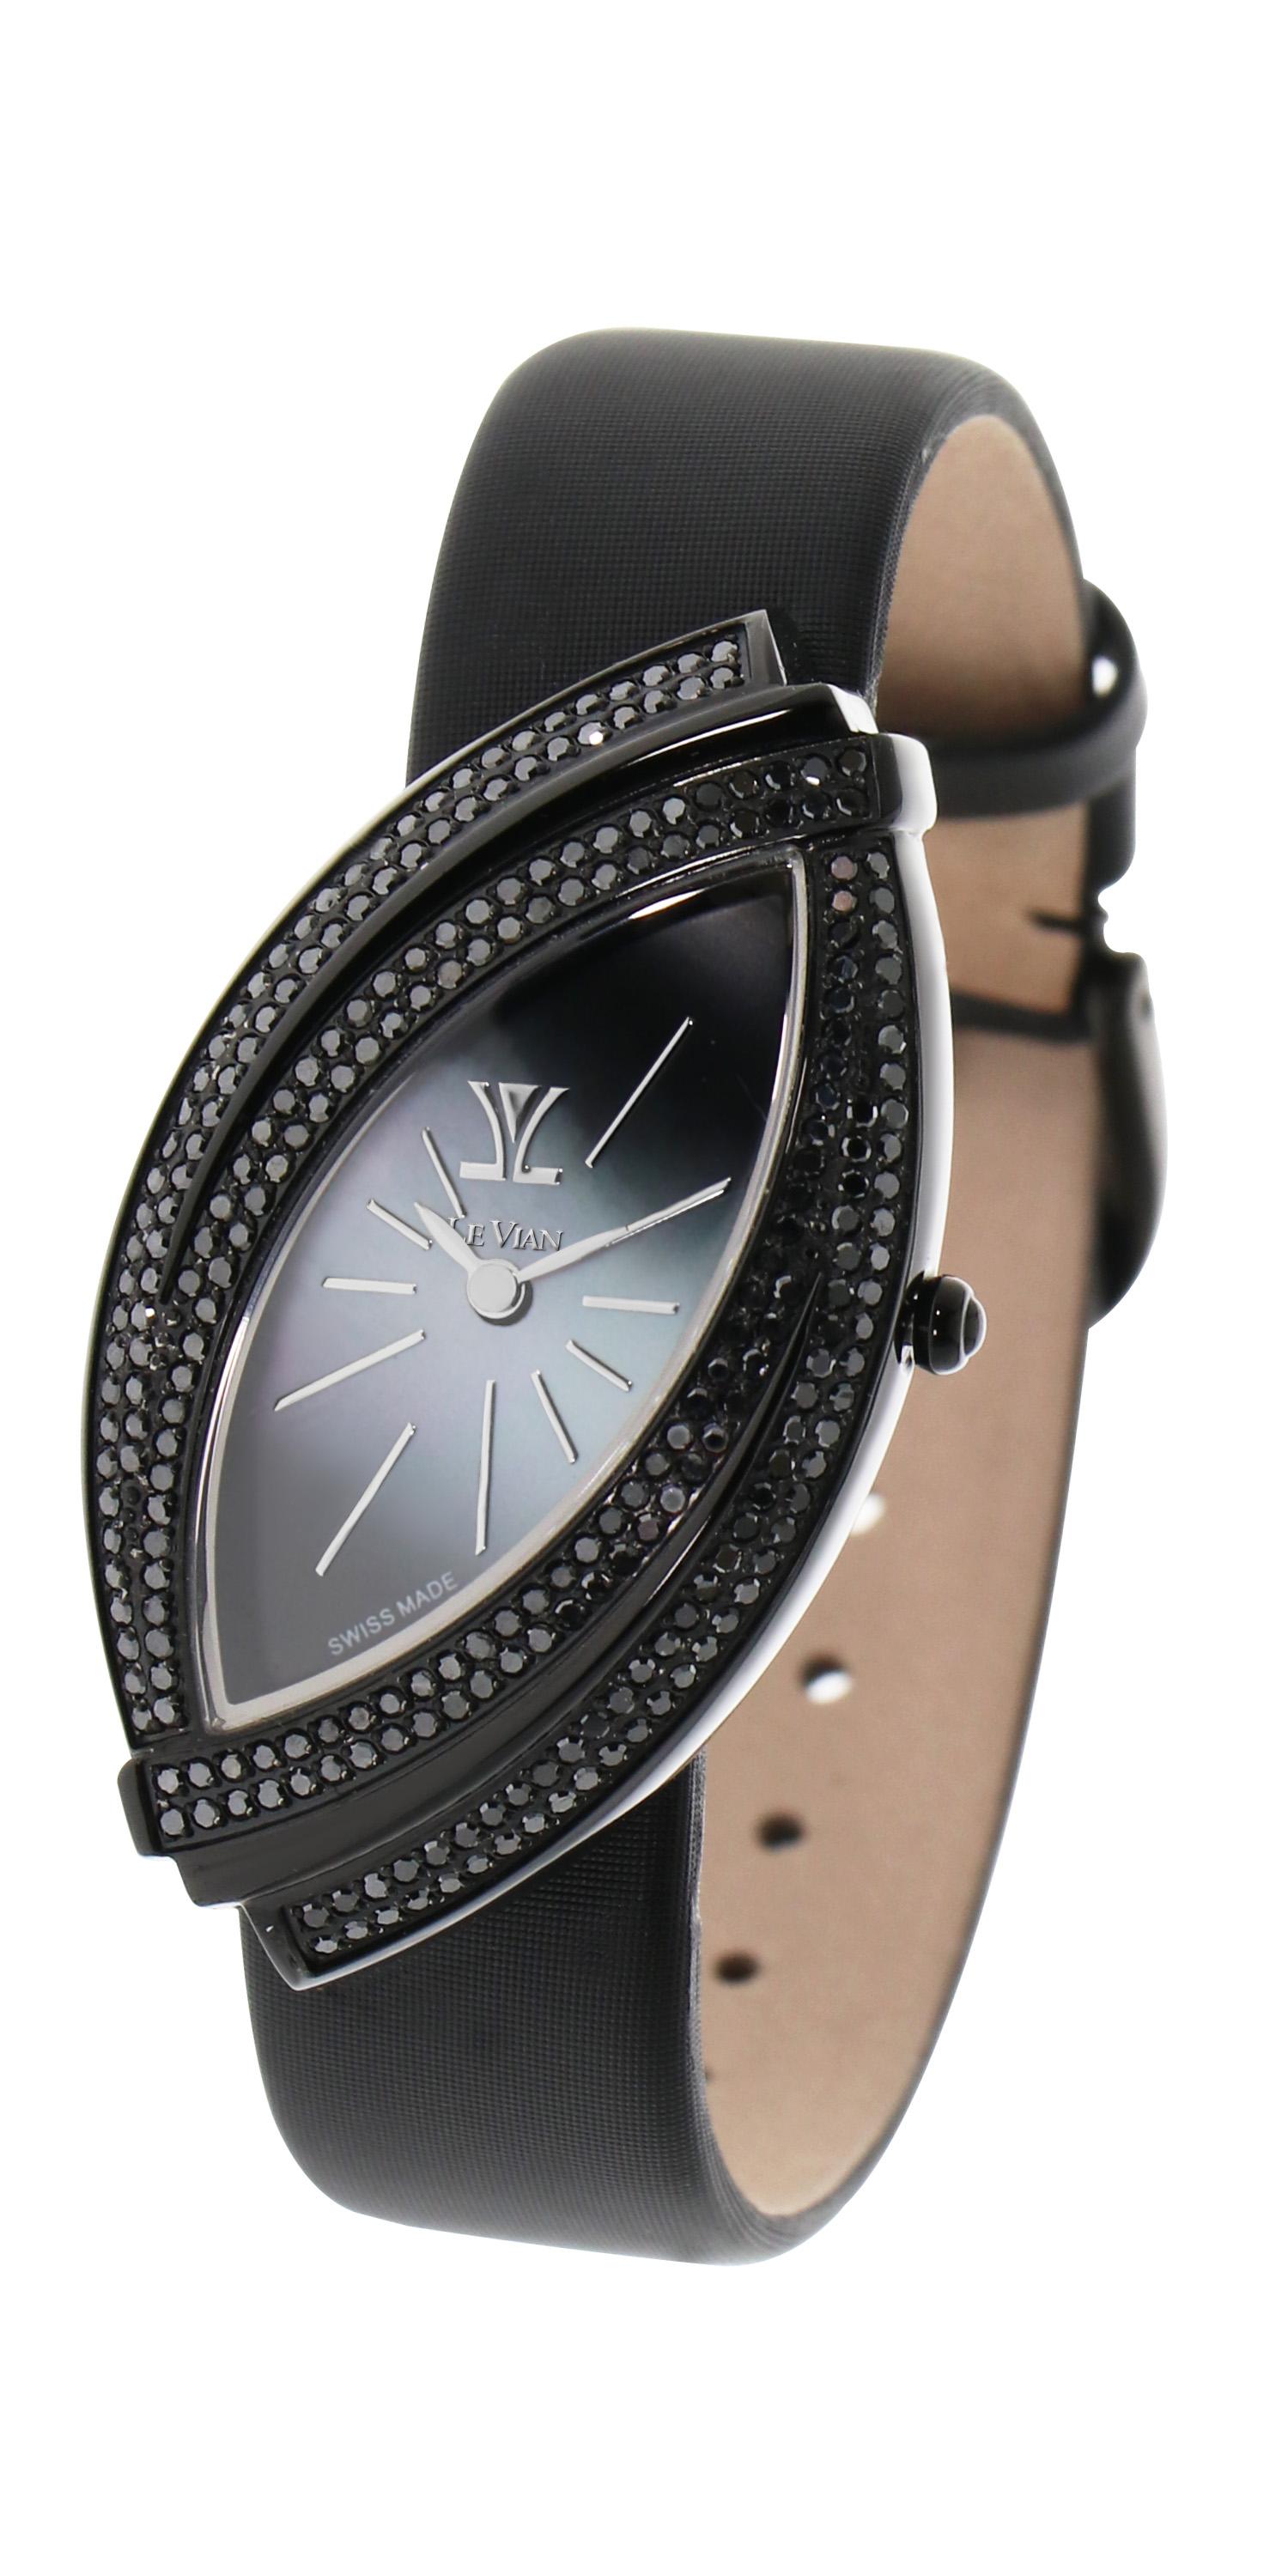 Le Vian 28mm Eye shaped Wristwatch featuring 2.18cts ofBlackberry Diamonds in Black Stainless Steel and a Satin Strap.
